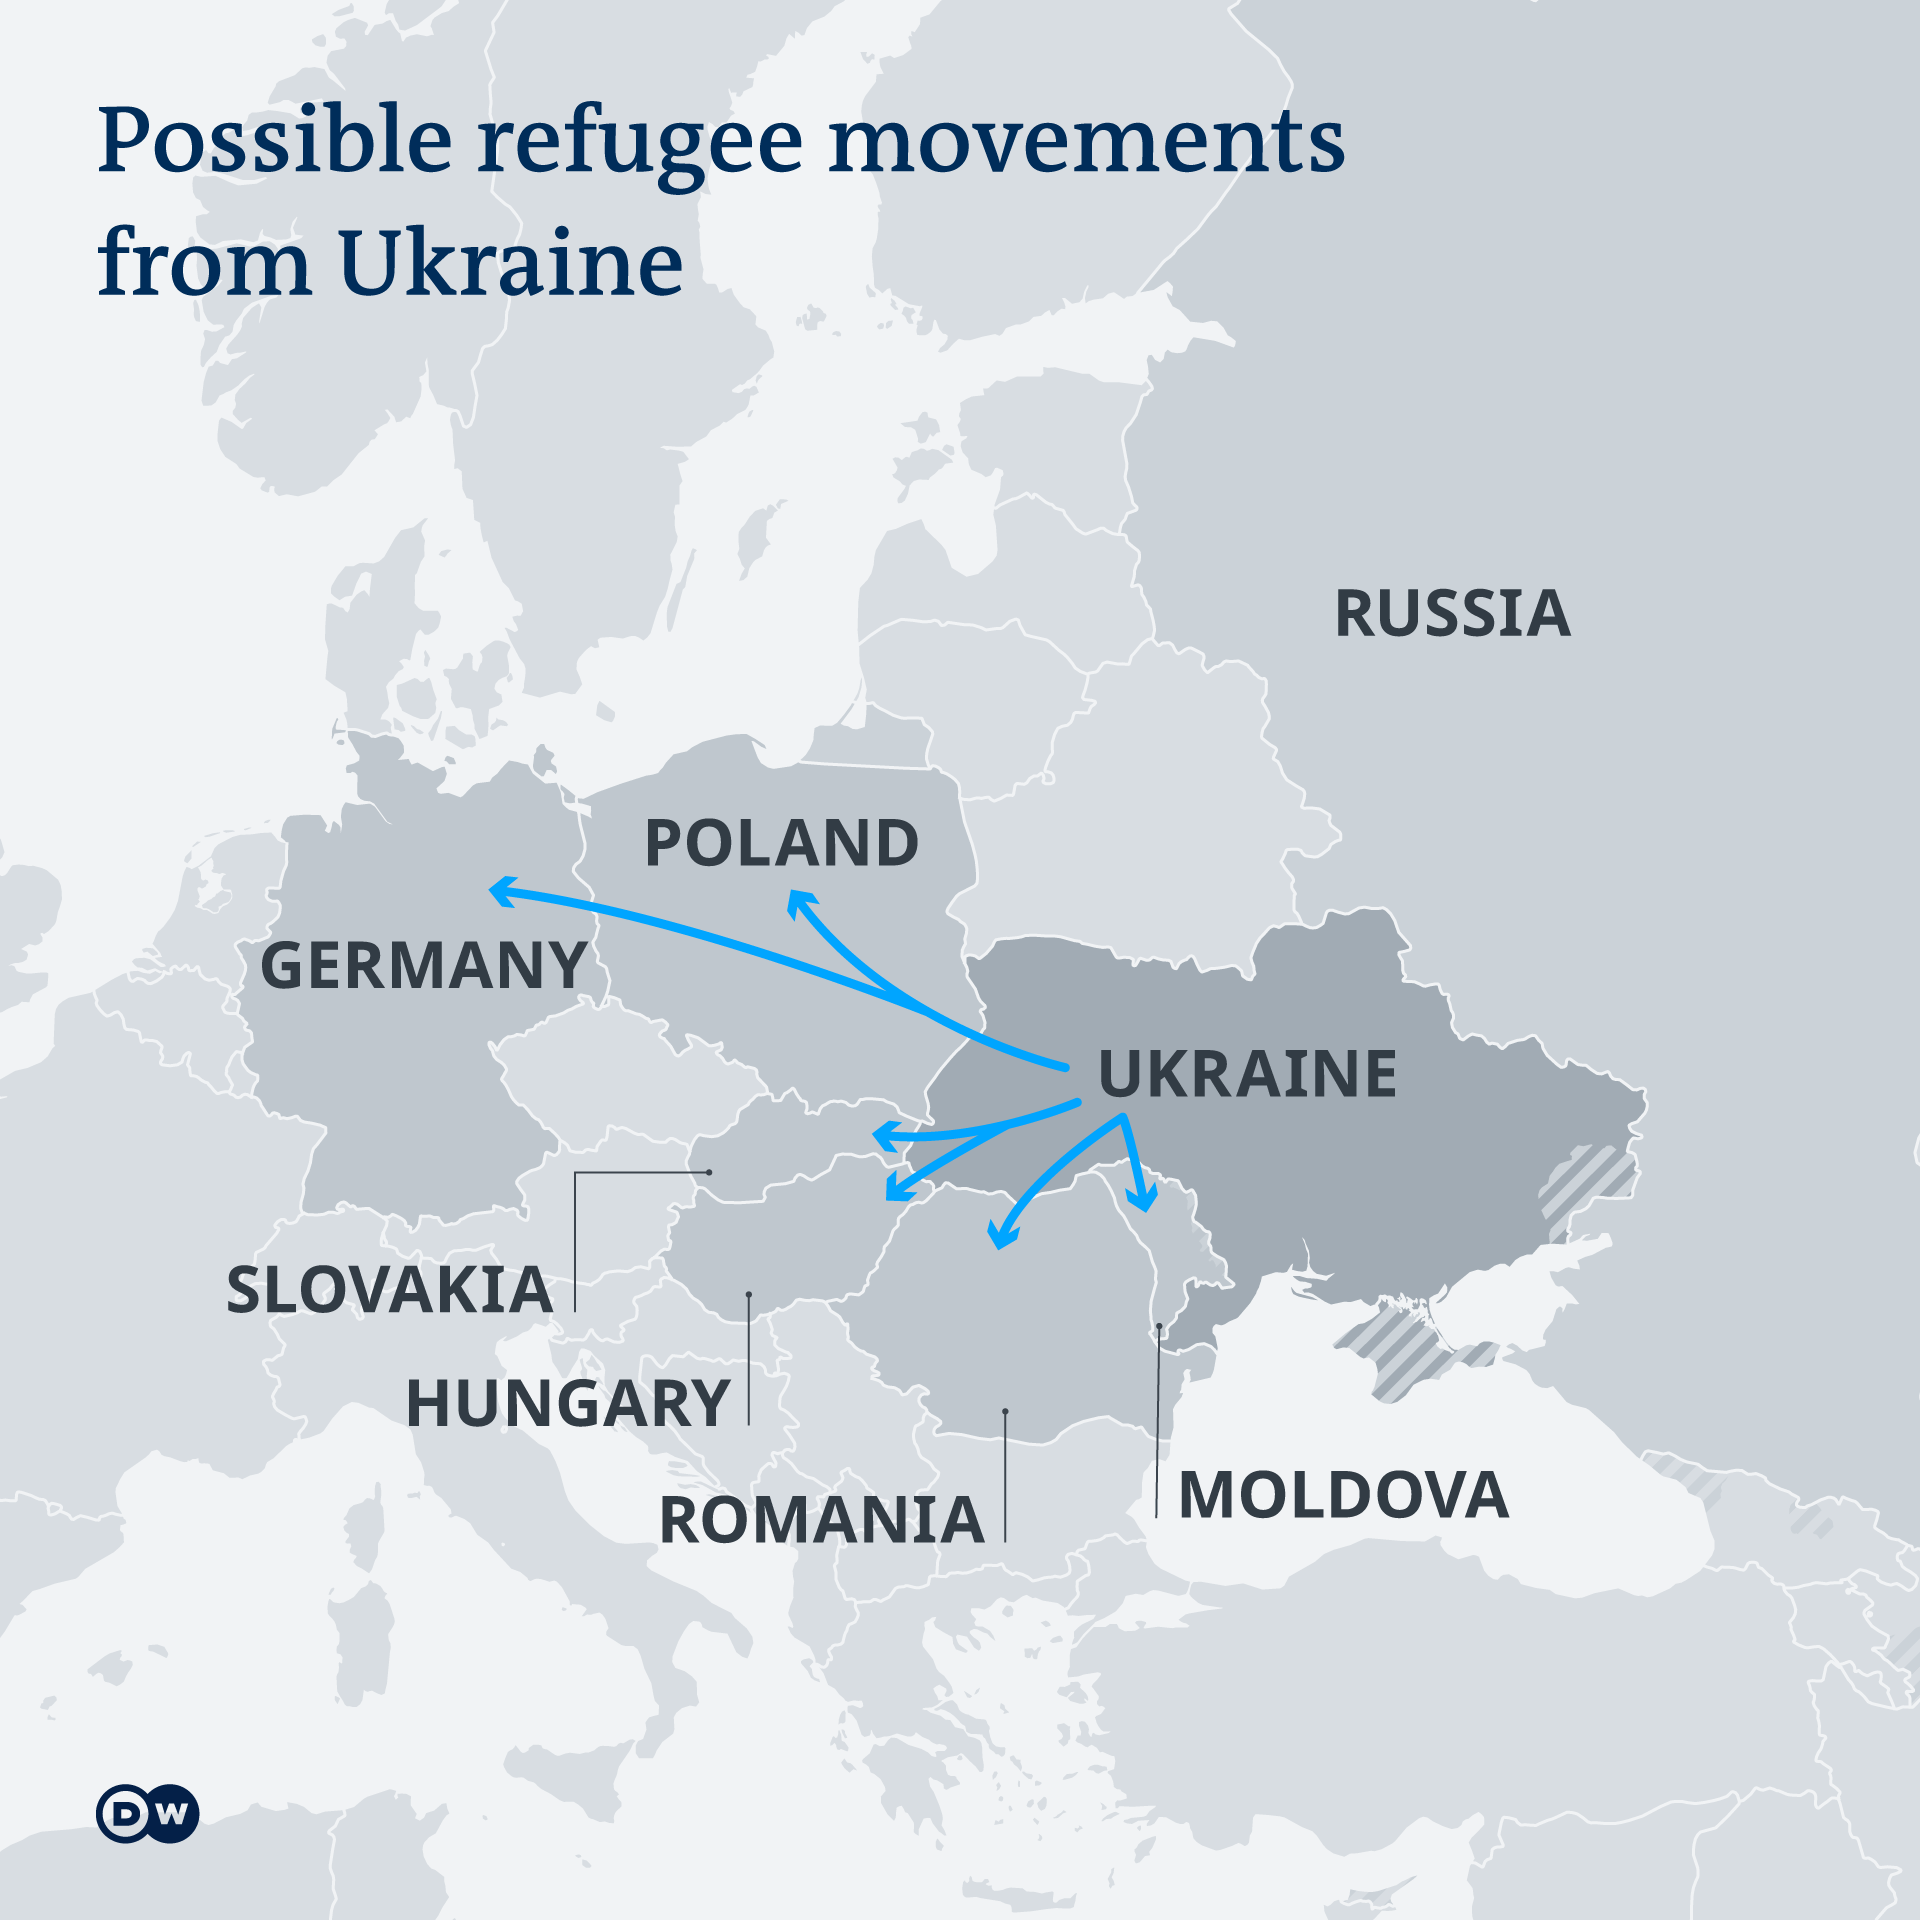 Map showing refugee movements from Ukraine to neighboring countries